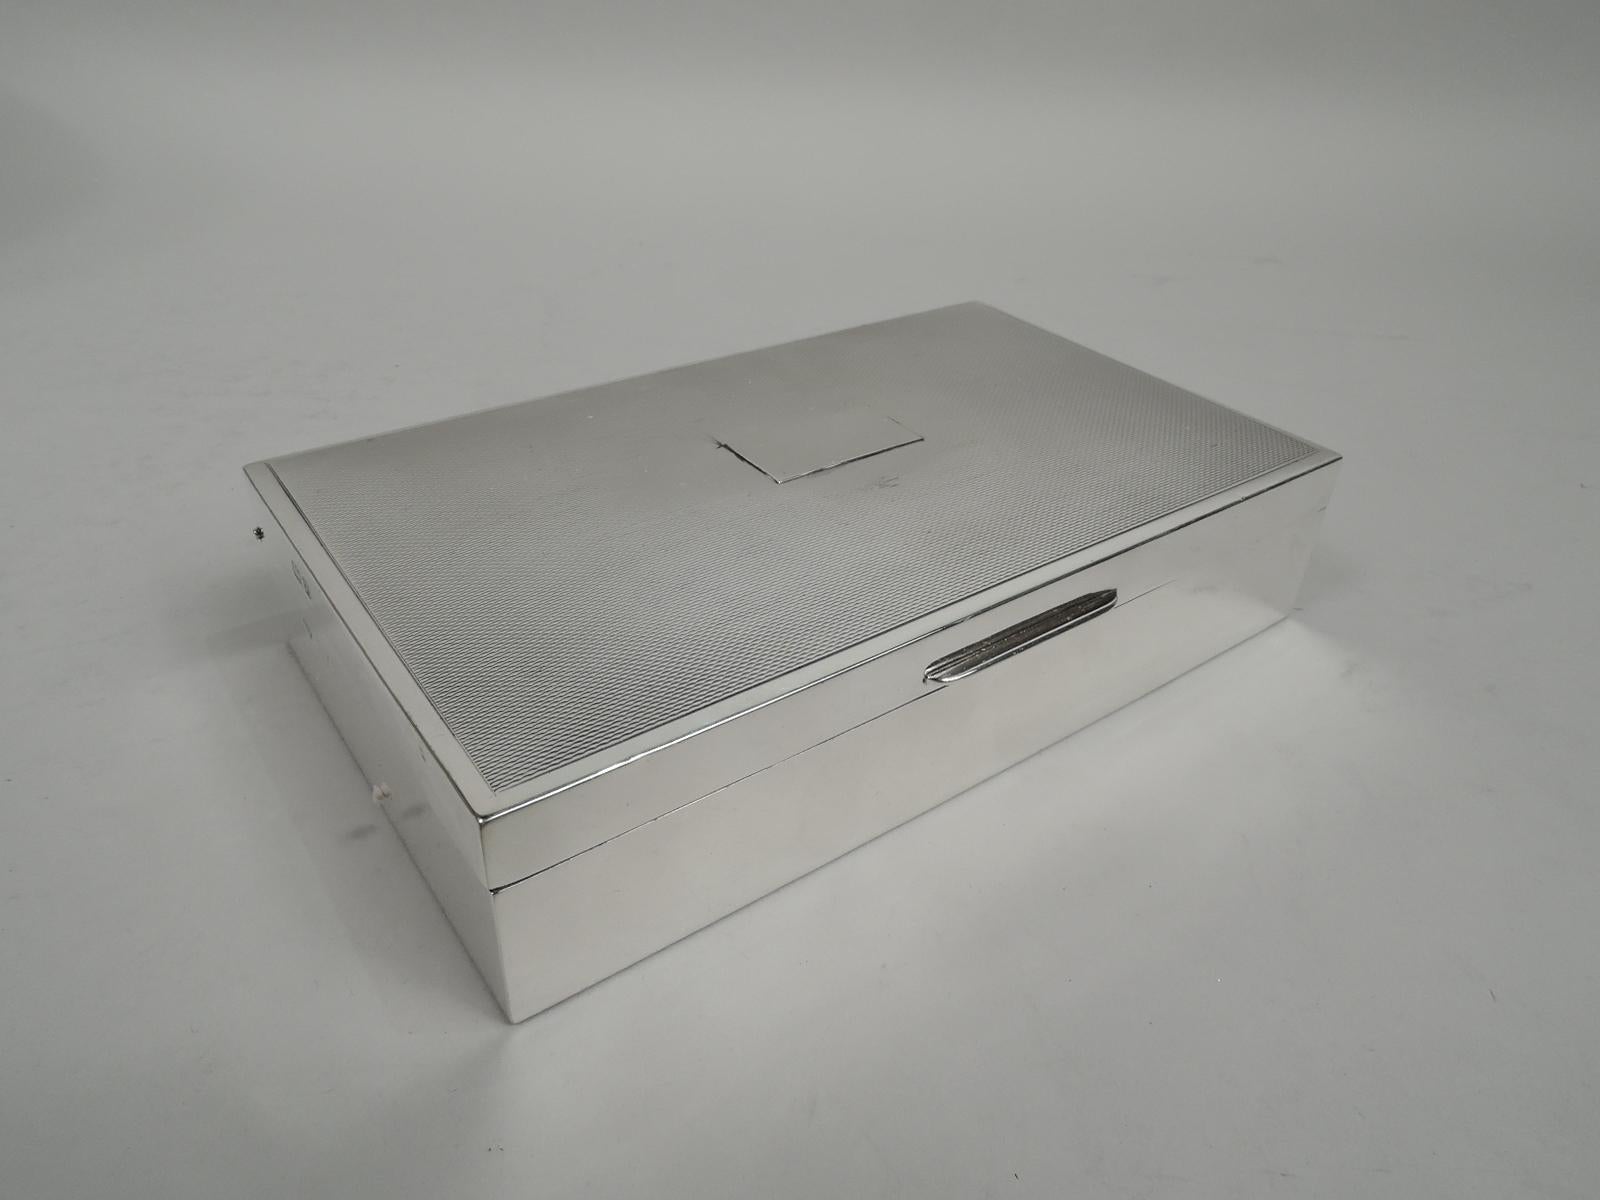 Art Deco sterling silver box. Made by E. & N. Speak in Birmingham in 1955. Rectangular with plain and straight sides. Cover hinged and tabbed; top gently curved with allover engine-turned ornament in plain border and applied central rectangular